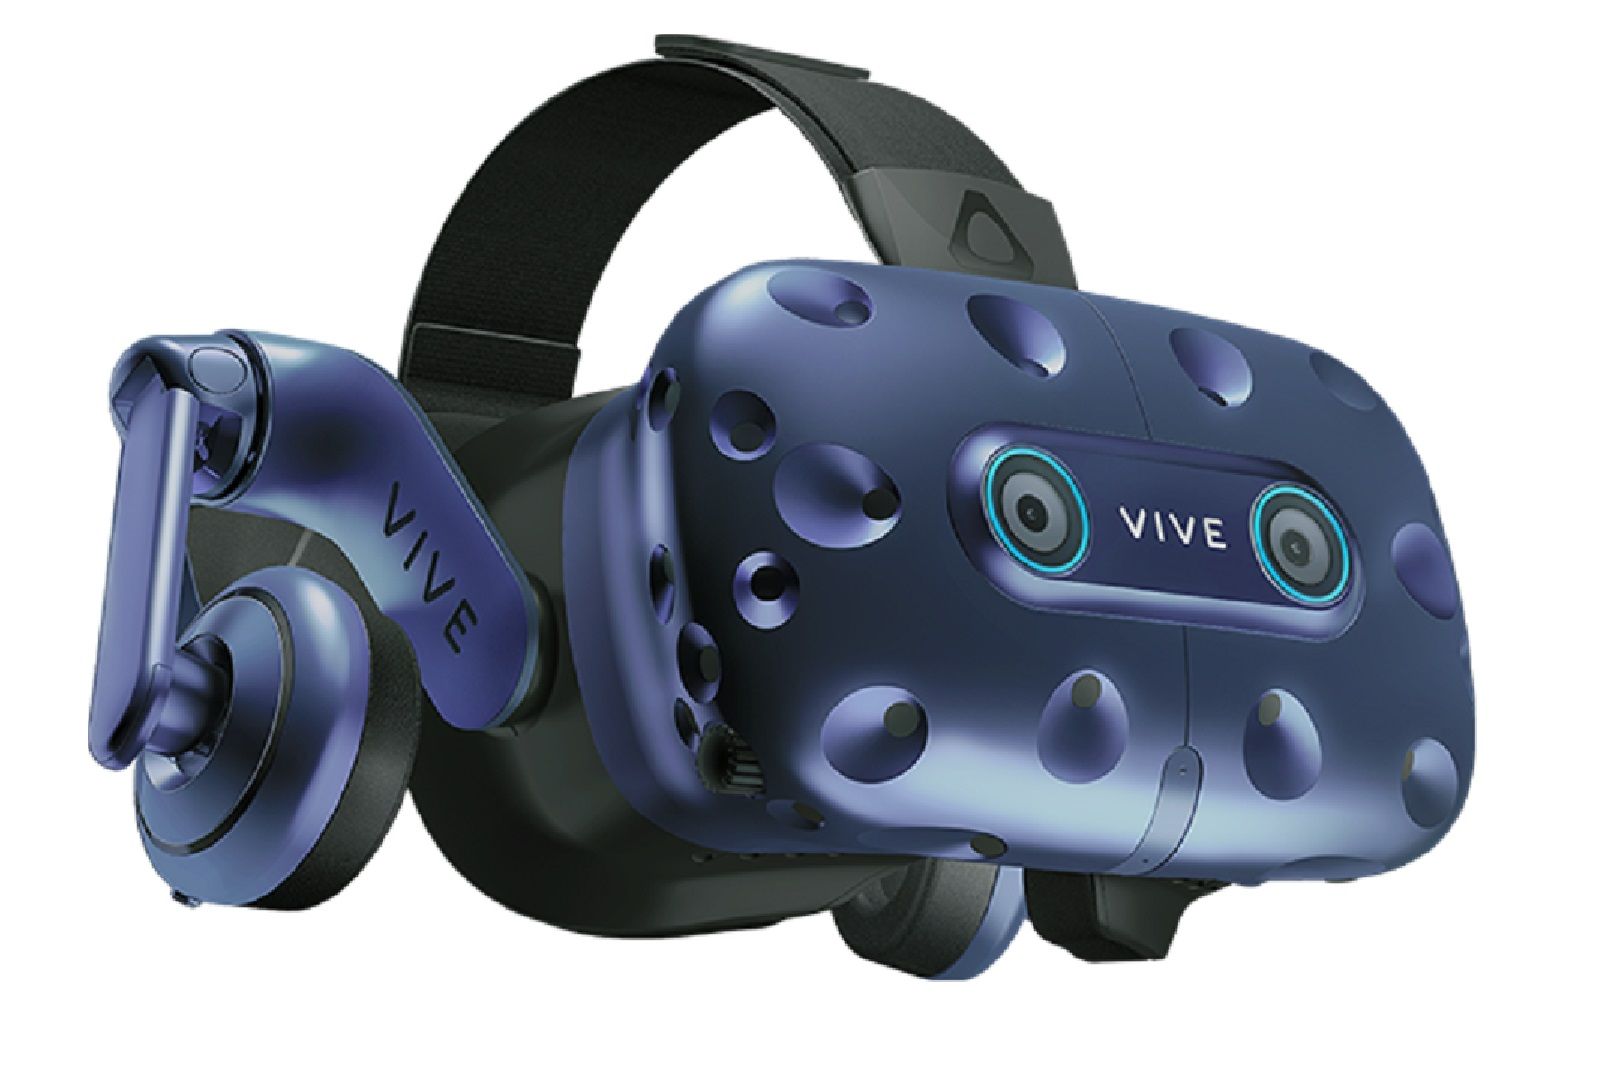 Htc Vive Vs Htc Vive Pro Whats The Difference image 10